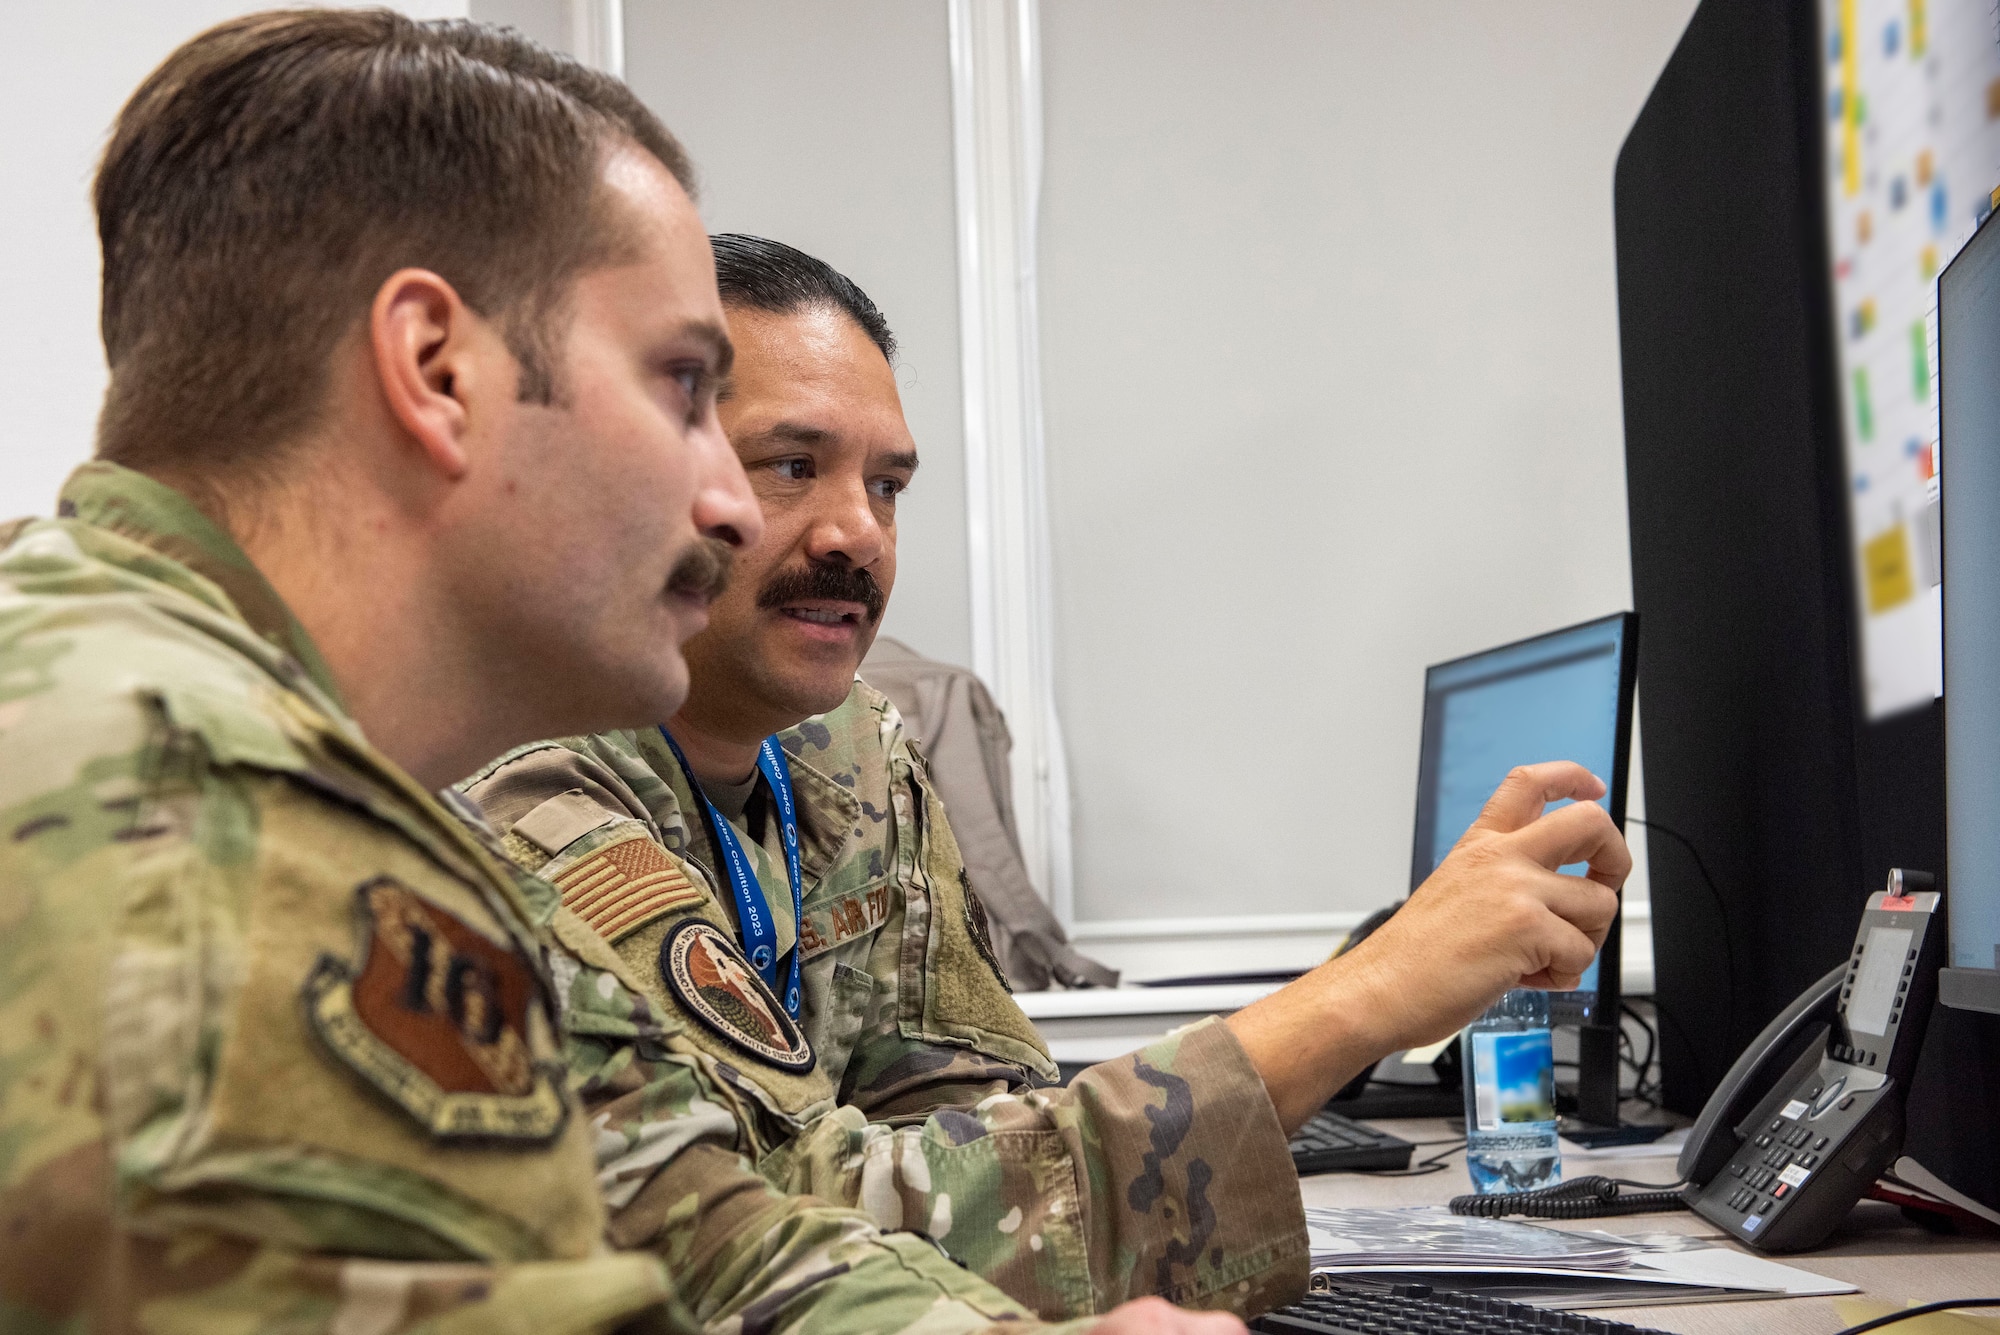 Two Airmen talk while looking at a computer.